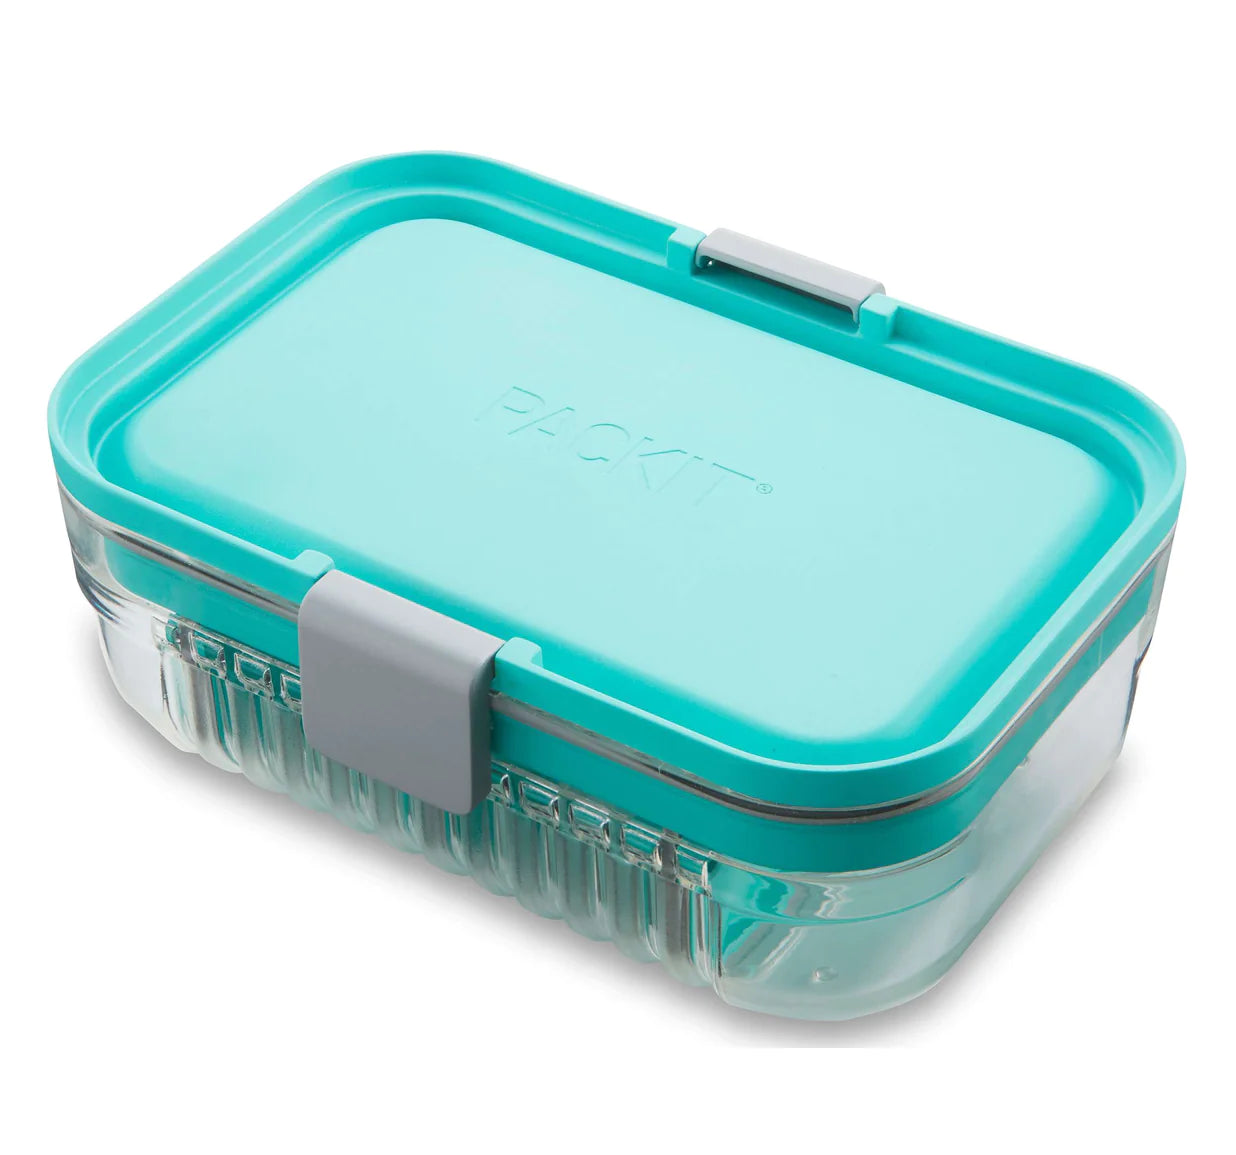 ERGO Packit Bento Lunch Box | Shop at The Green Collective